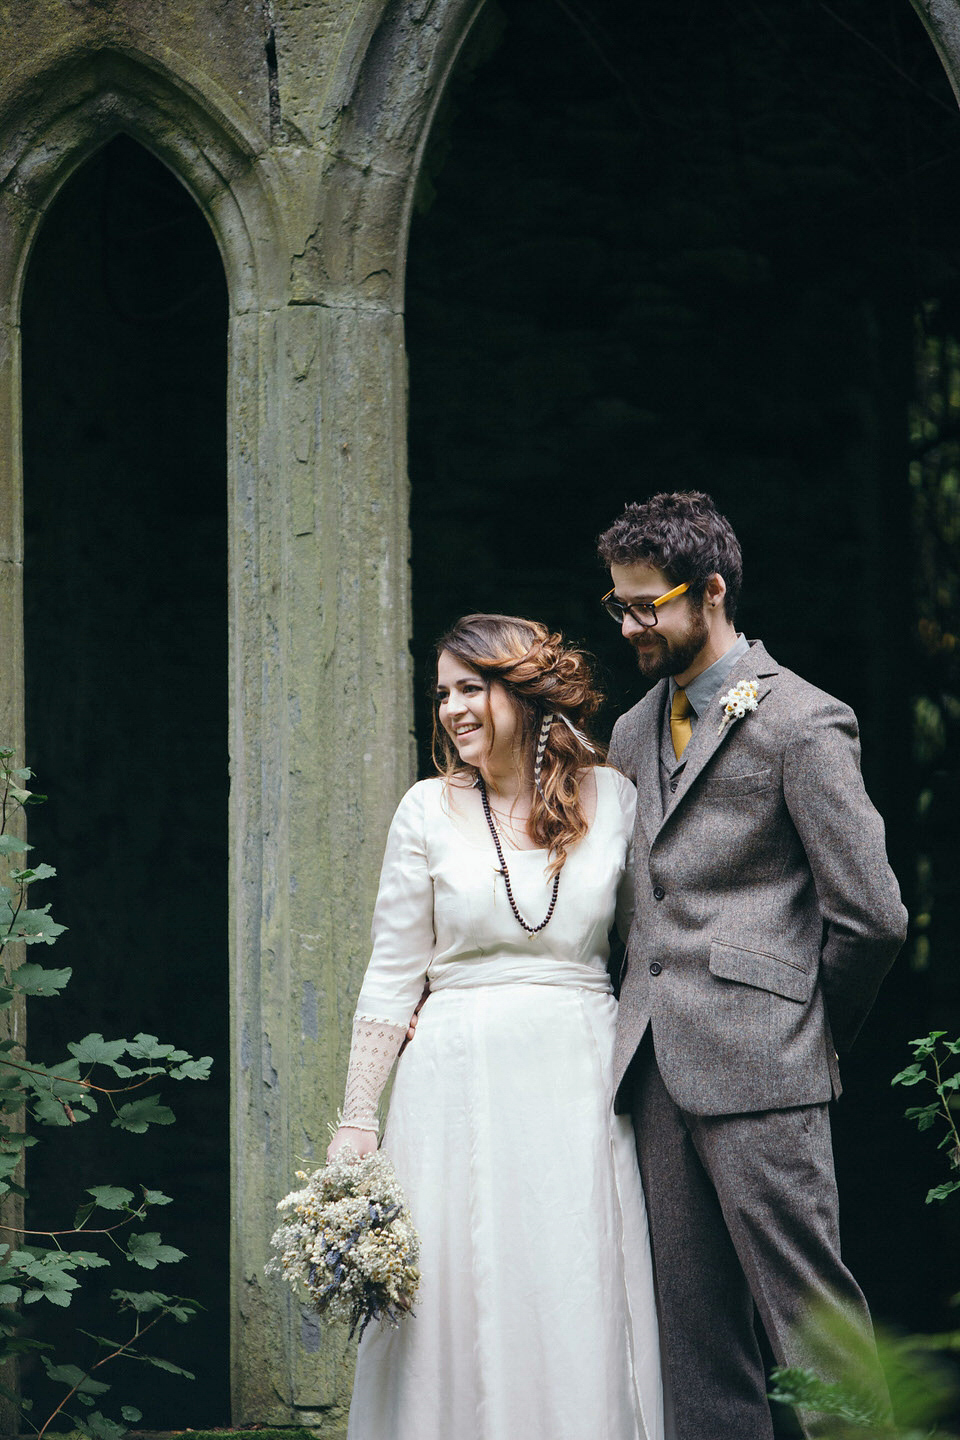 A tweed jacket and feathers in her hair for a boho bride and her eclectic woodland wedding. Images by Mirrorbox Photography.